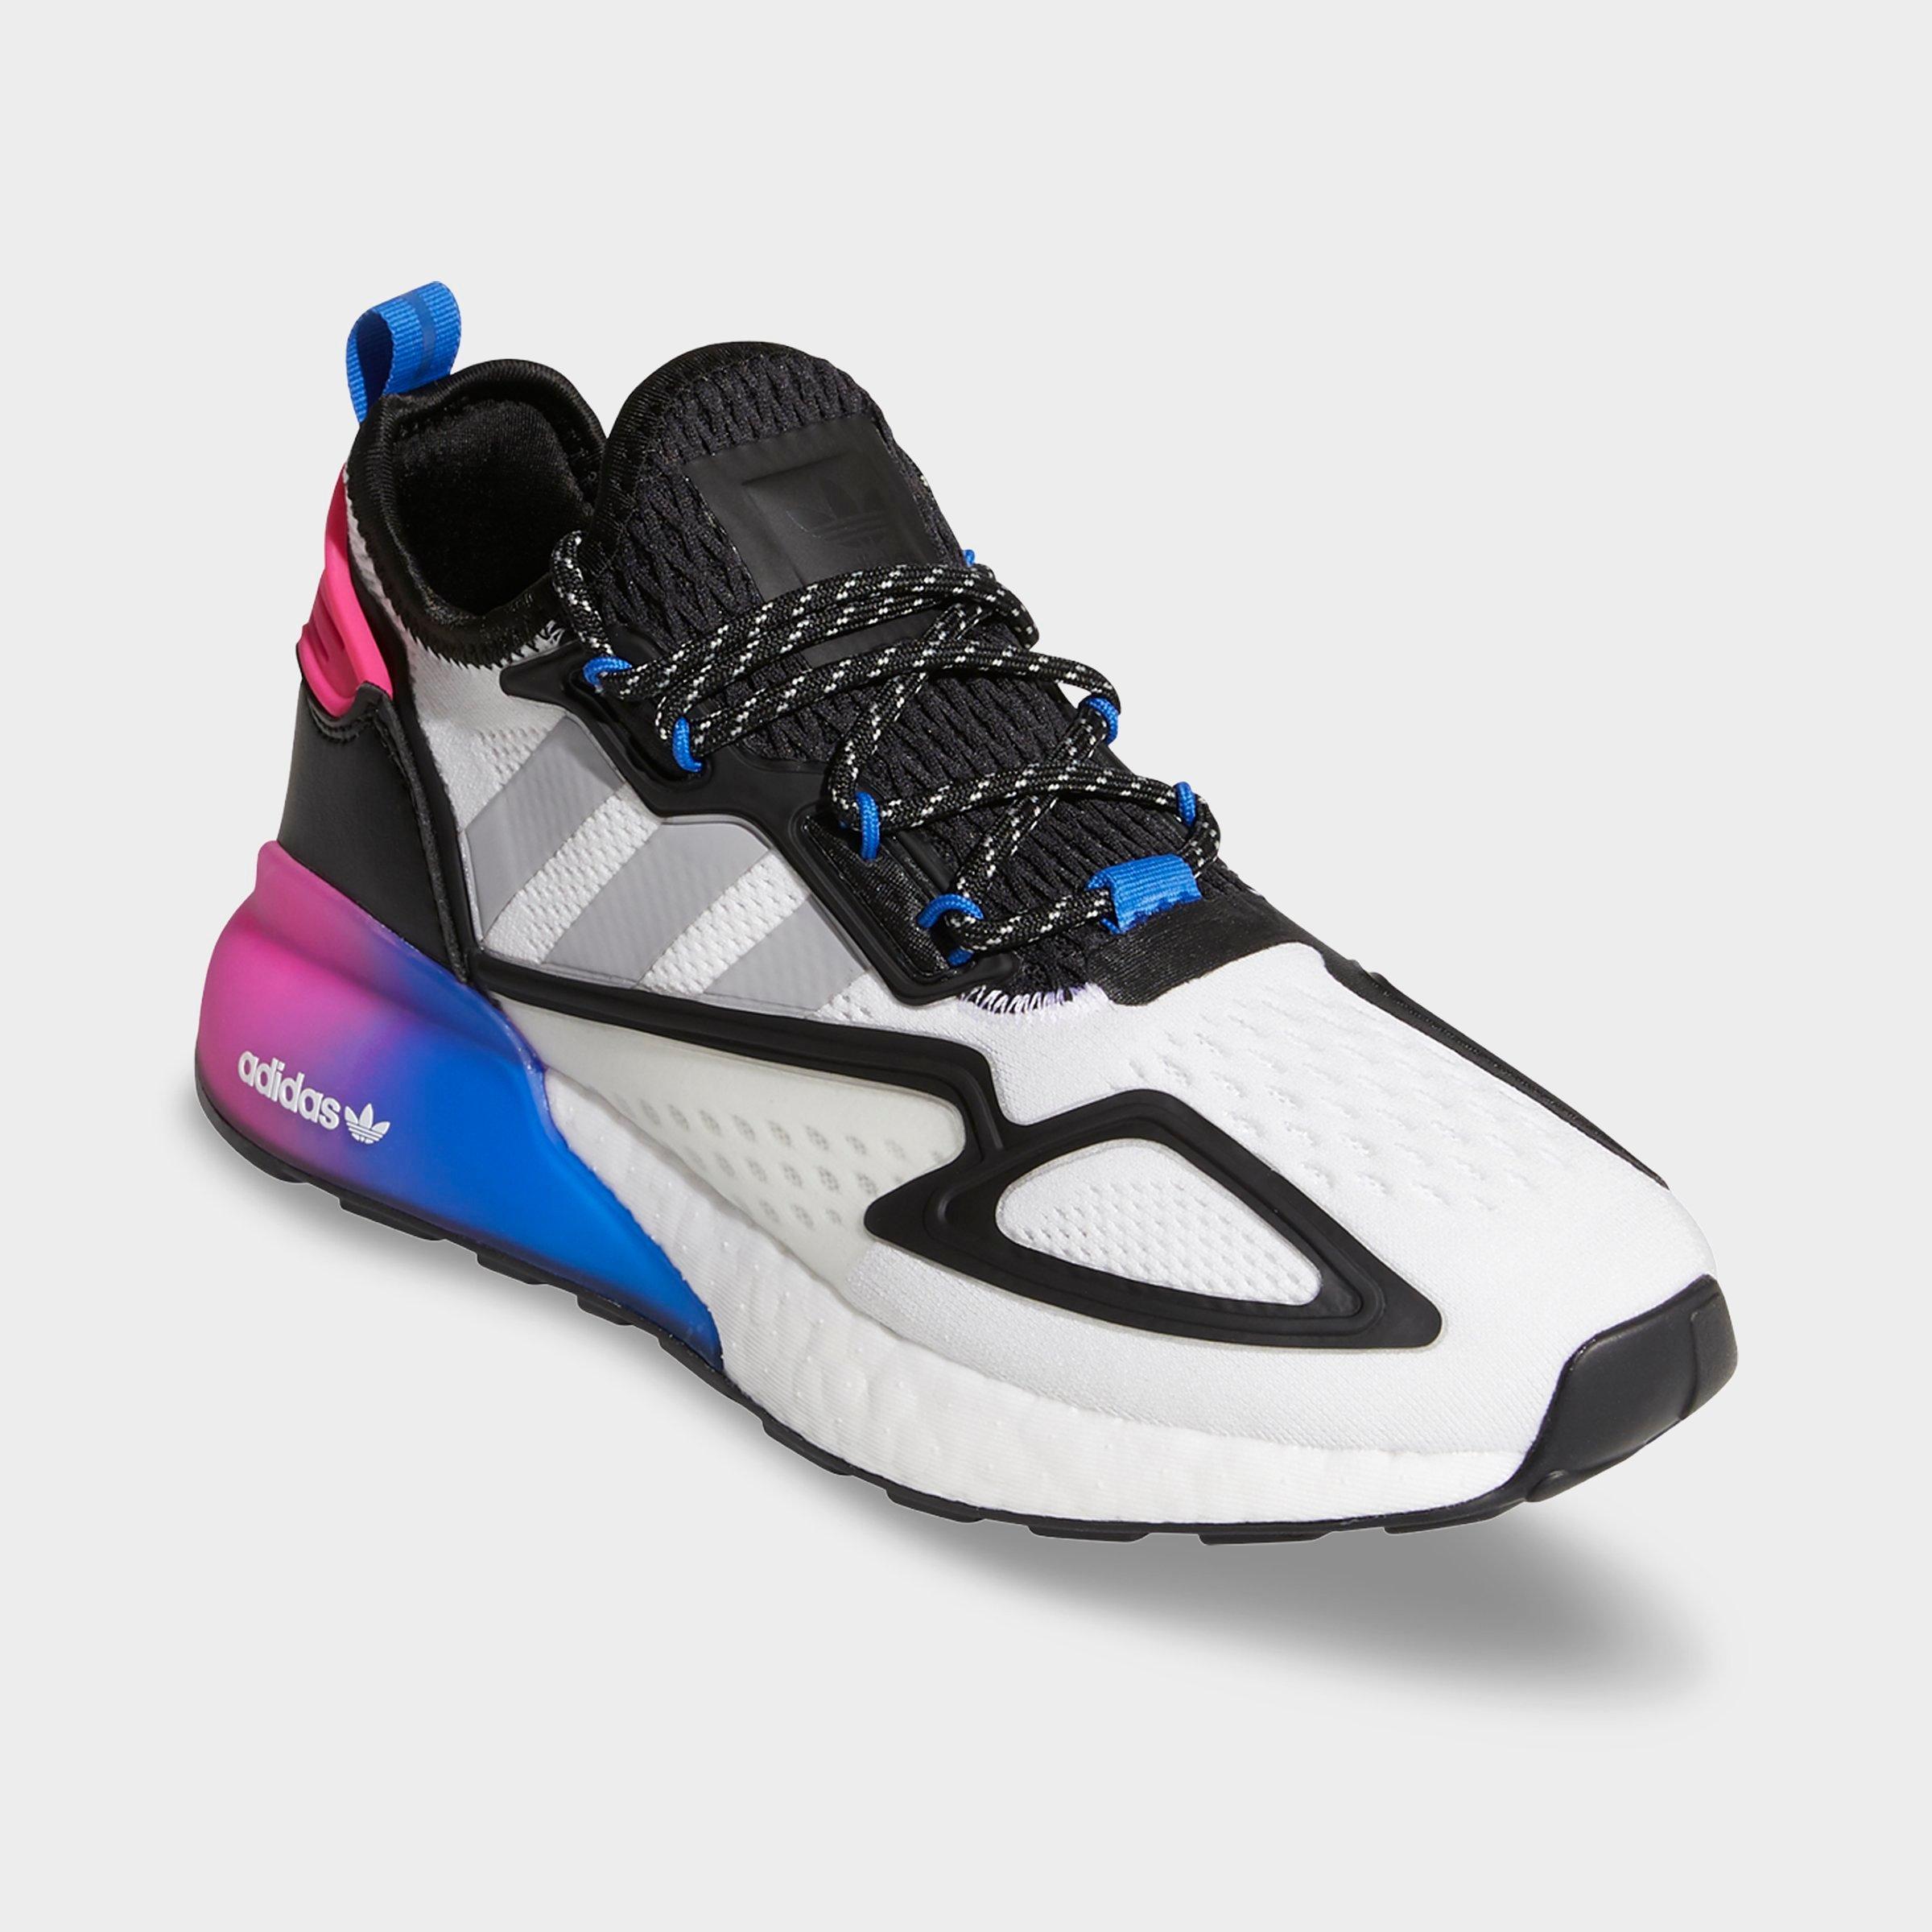 adidas zoom boost basketball shoes